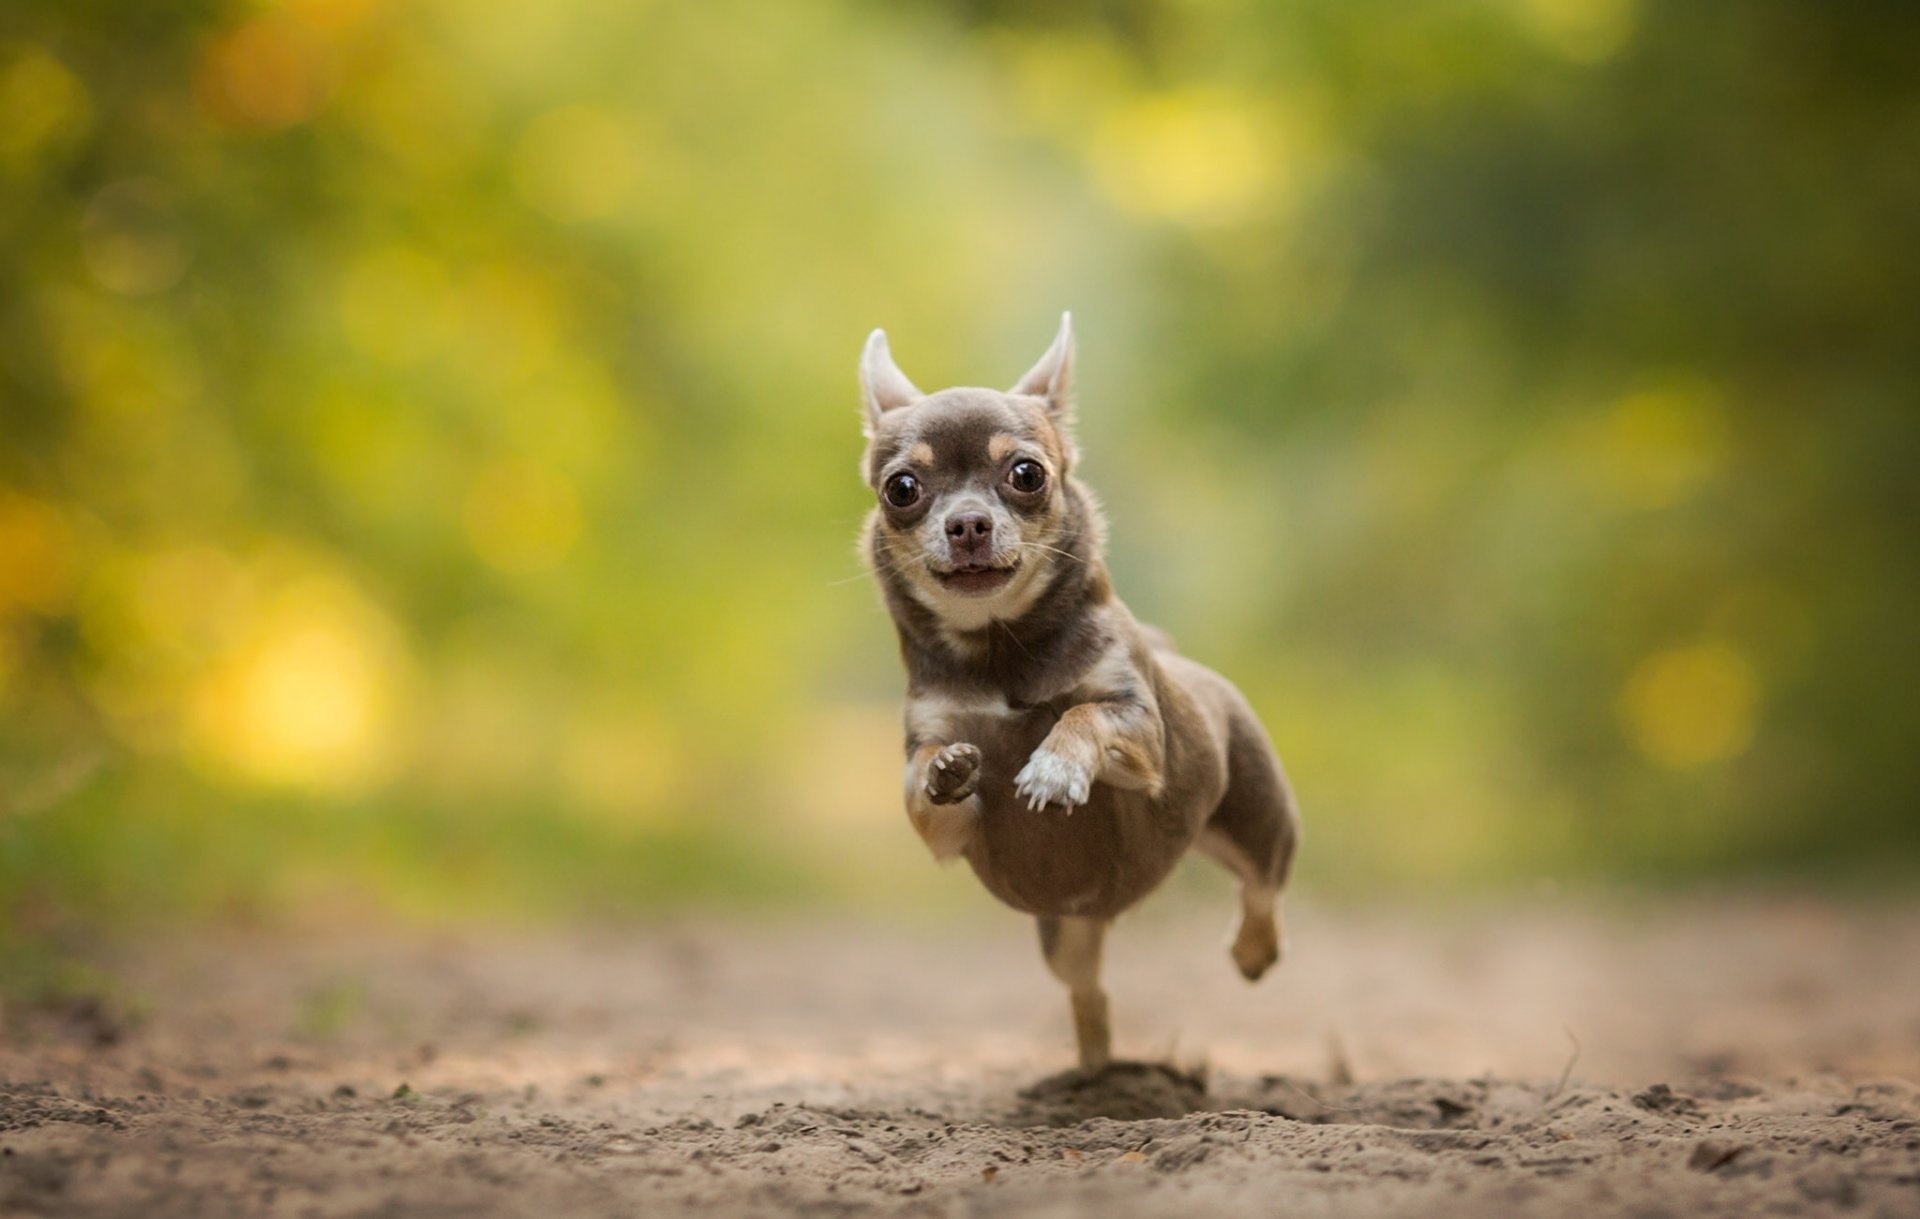 Chihuahua in 4K, Captivating wallpapers, Cute and charming, Stunning visuals, 1920x1220 HD Desktop